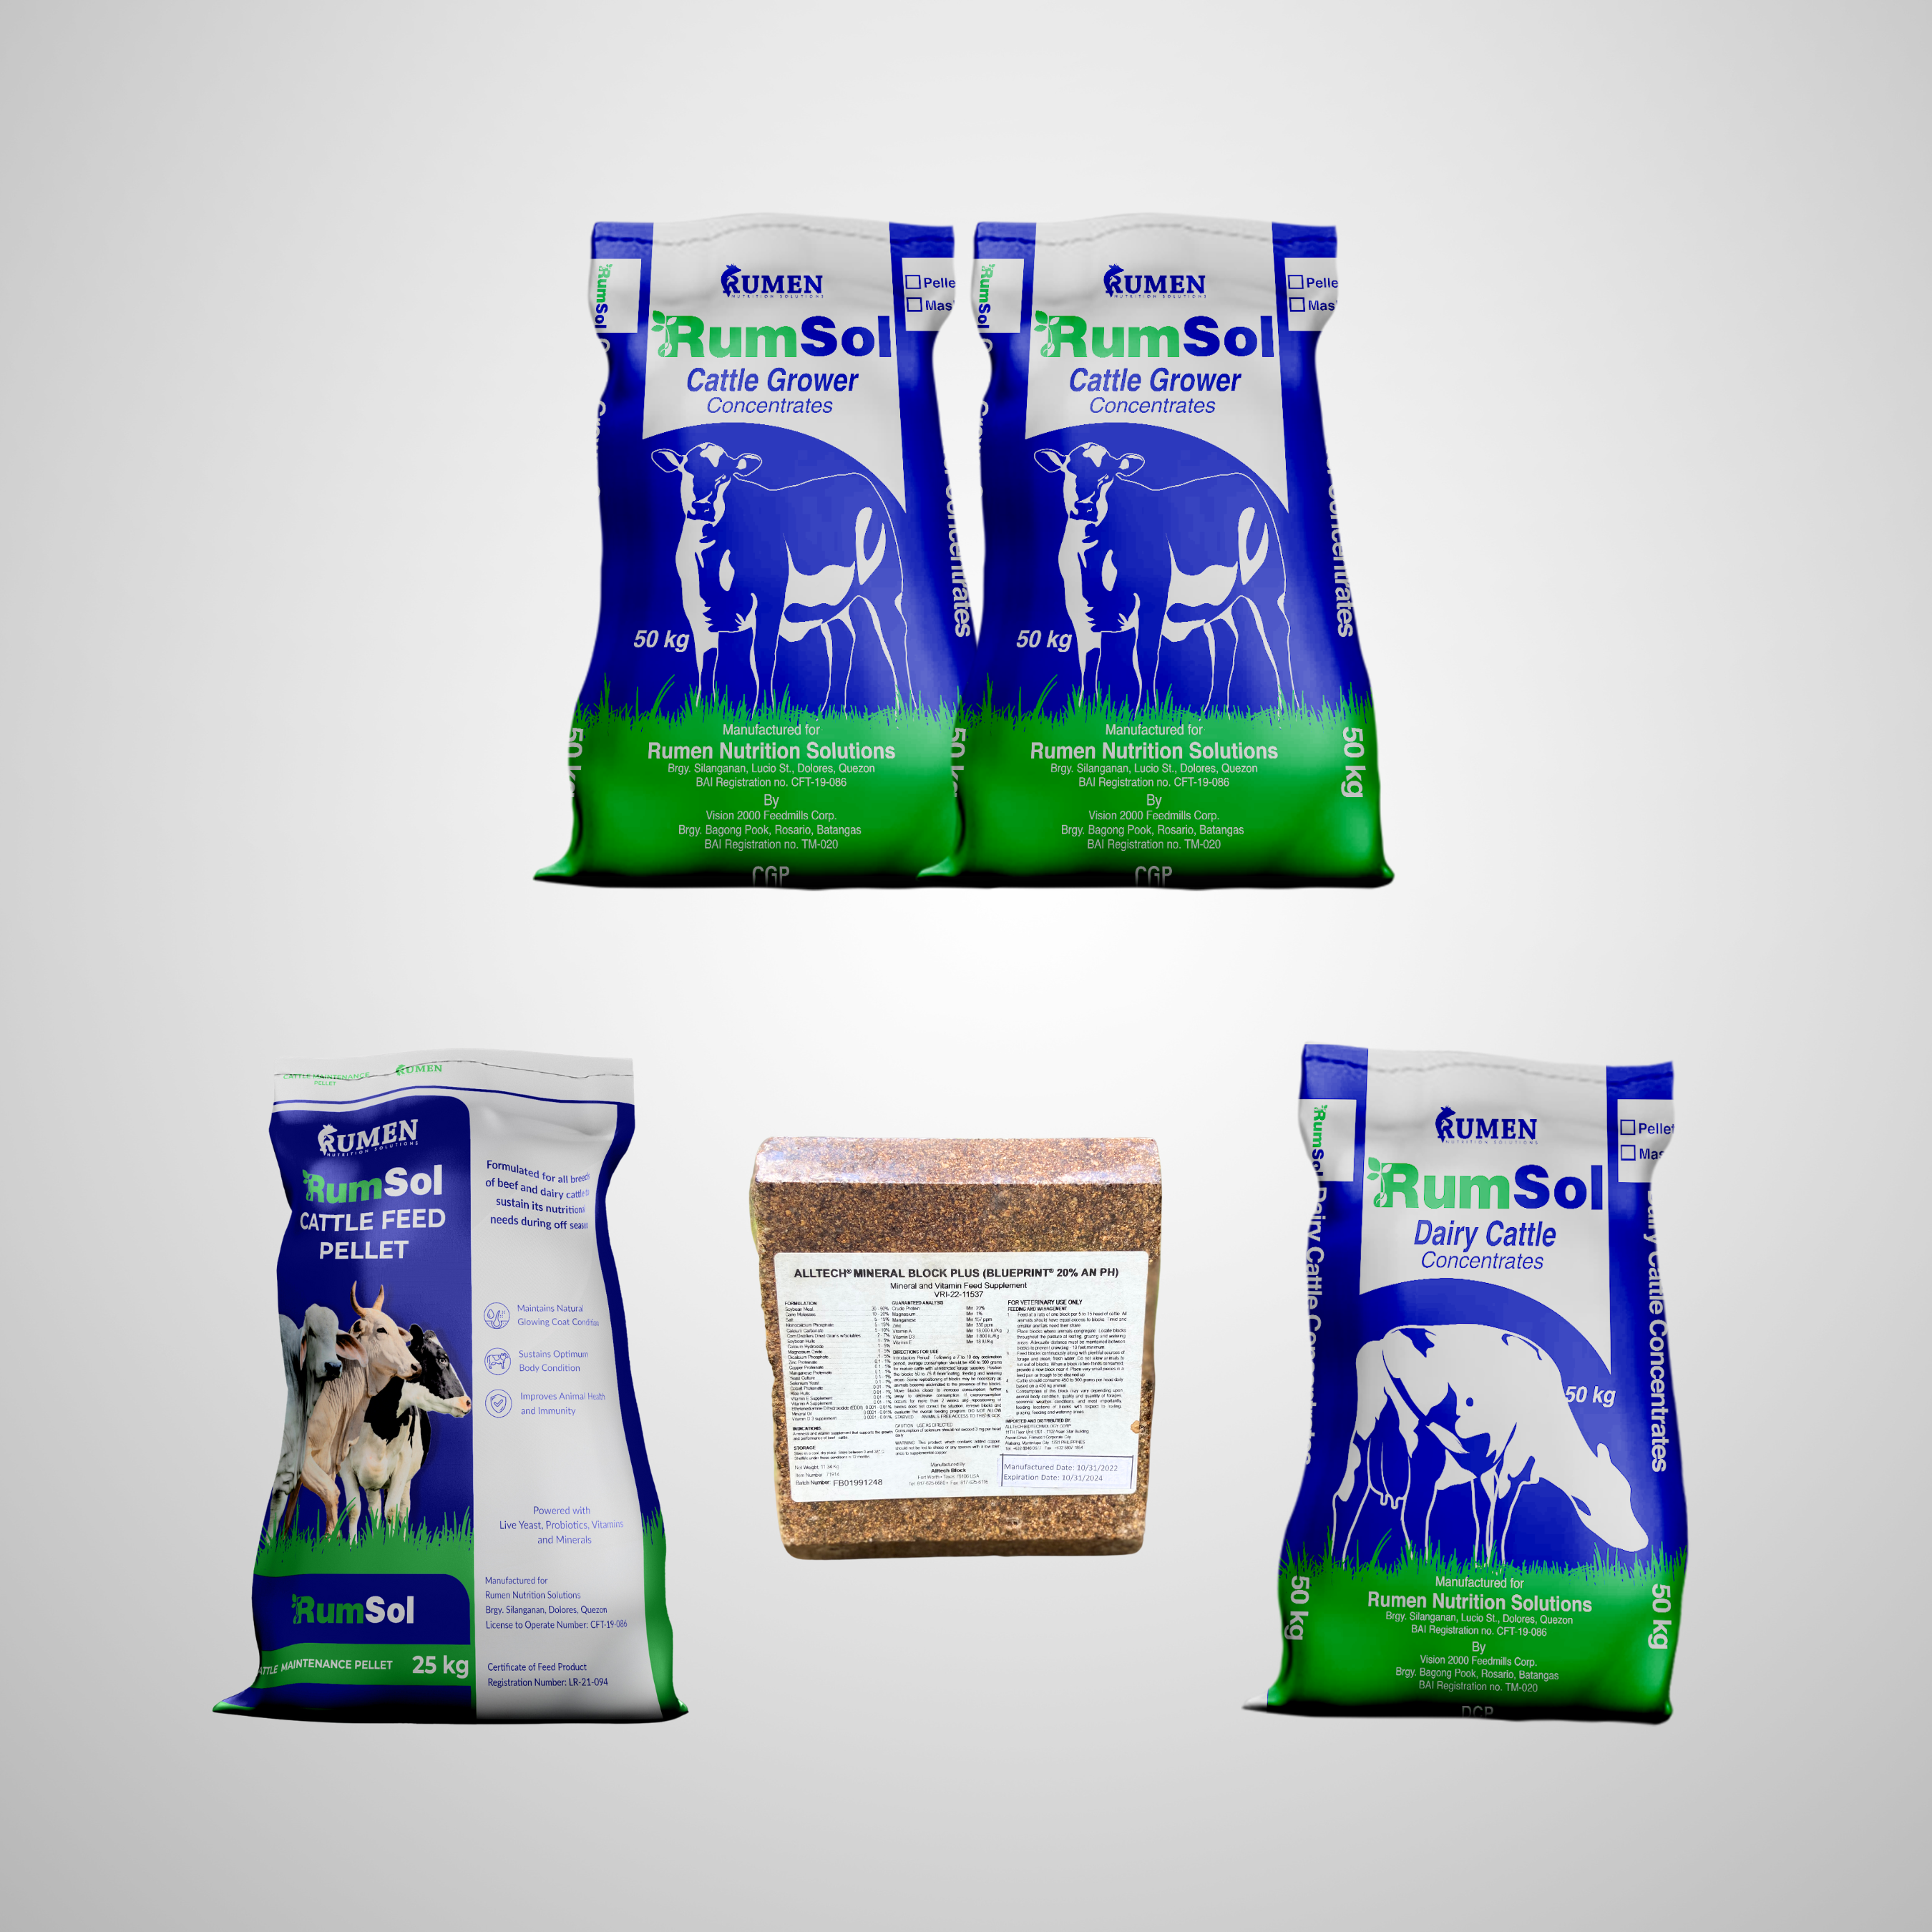 Bundle 14: Cattle Grower Concentrates, Dairy Cattle Concentrates, Cattle Feed Pellet & Alltech Block